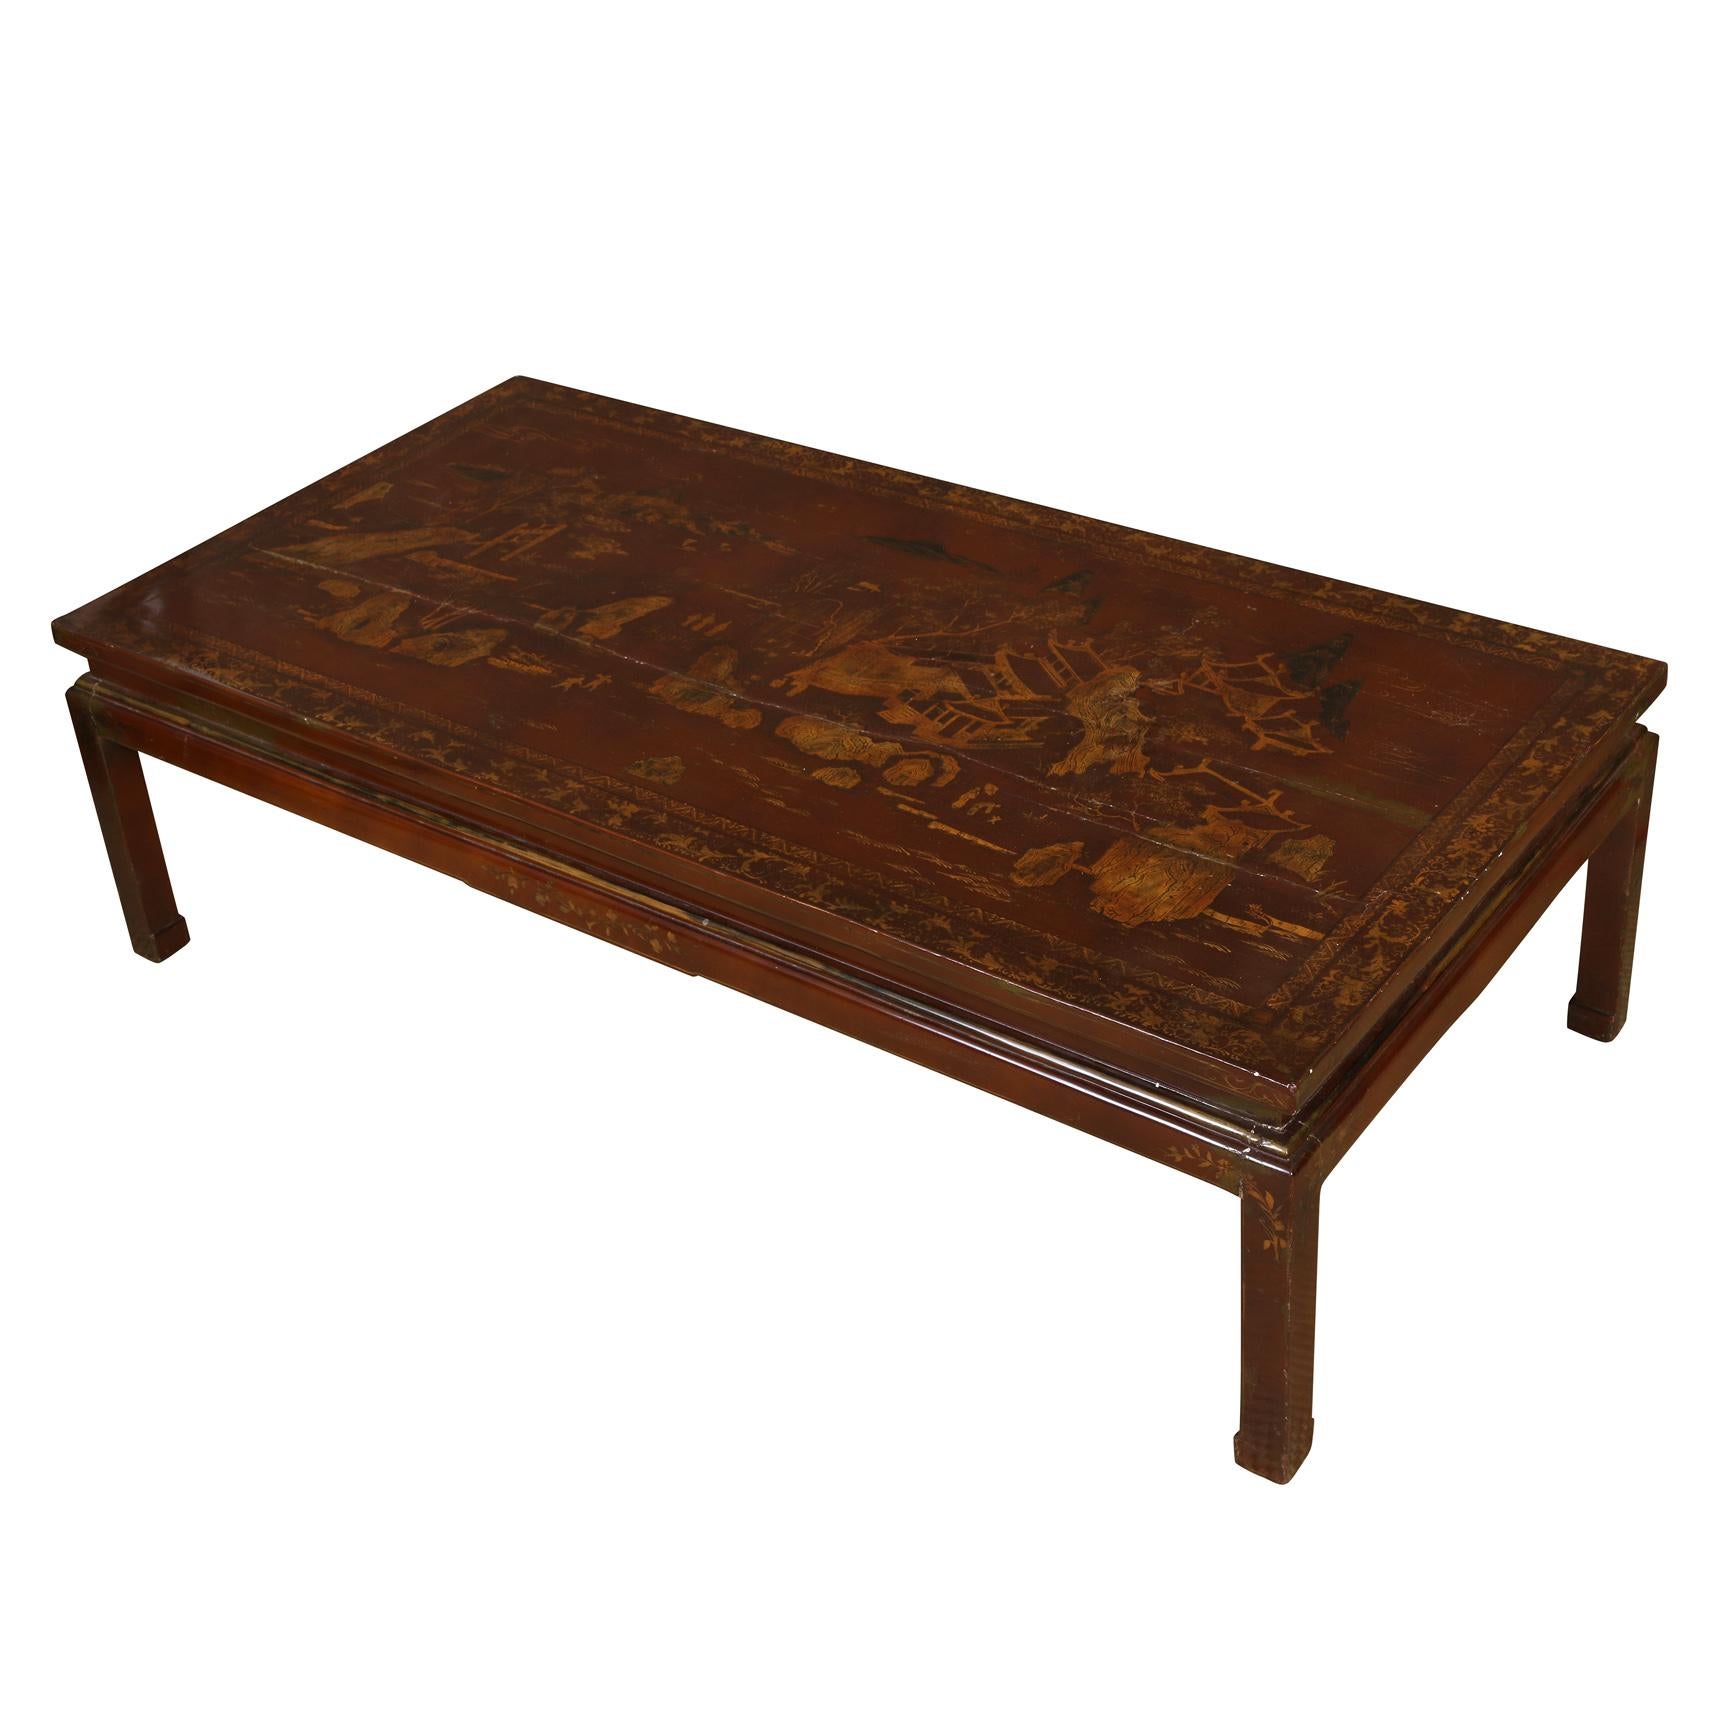 Gilt decorated Asian coffee table in deep lacquered tone with square hoof feet.